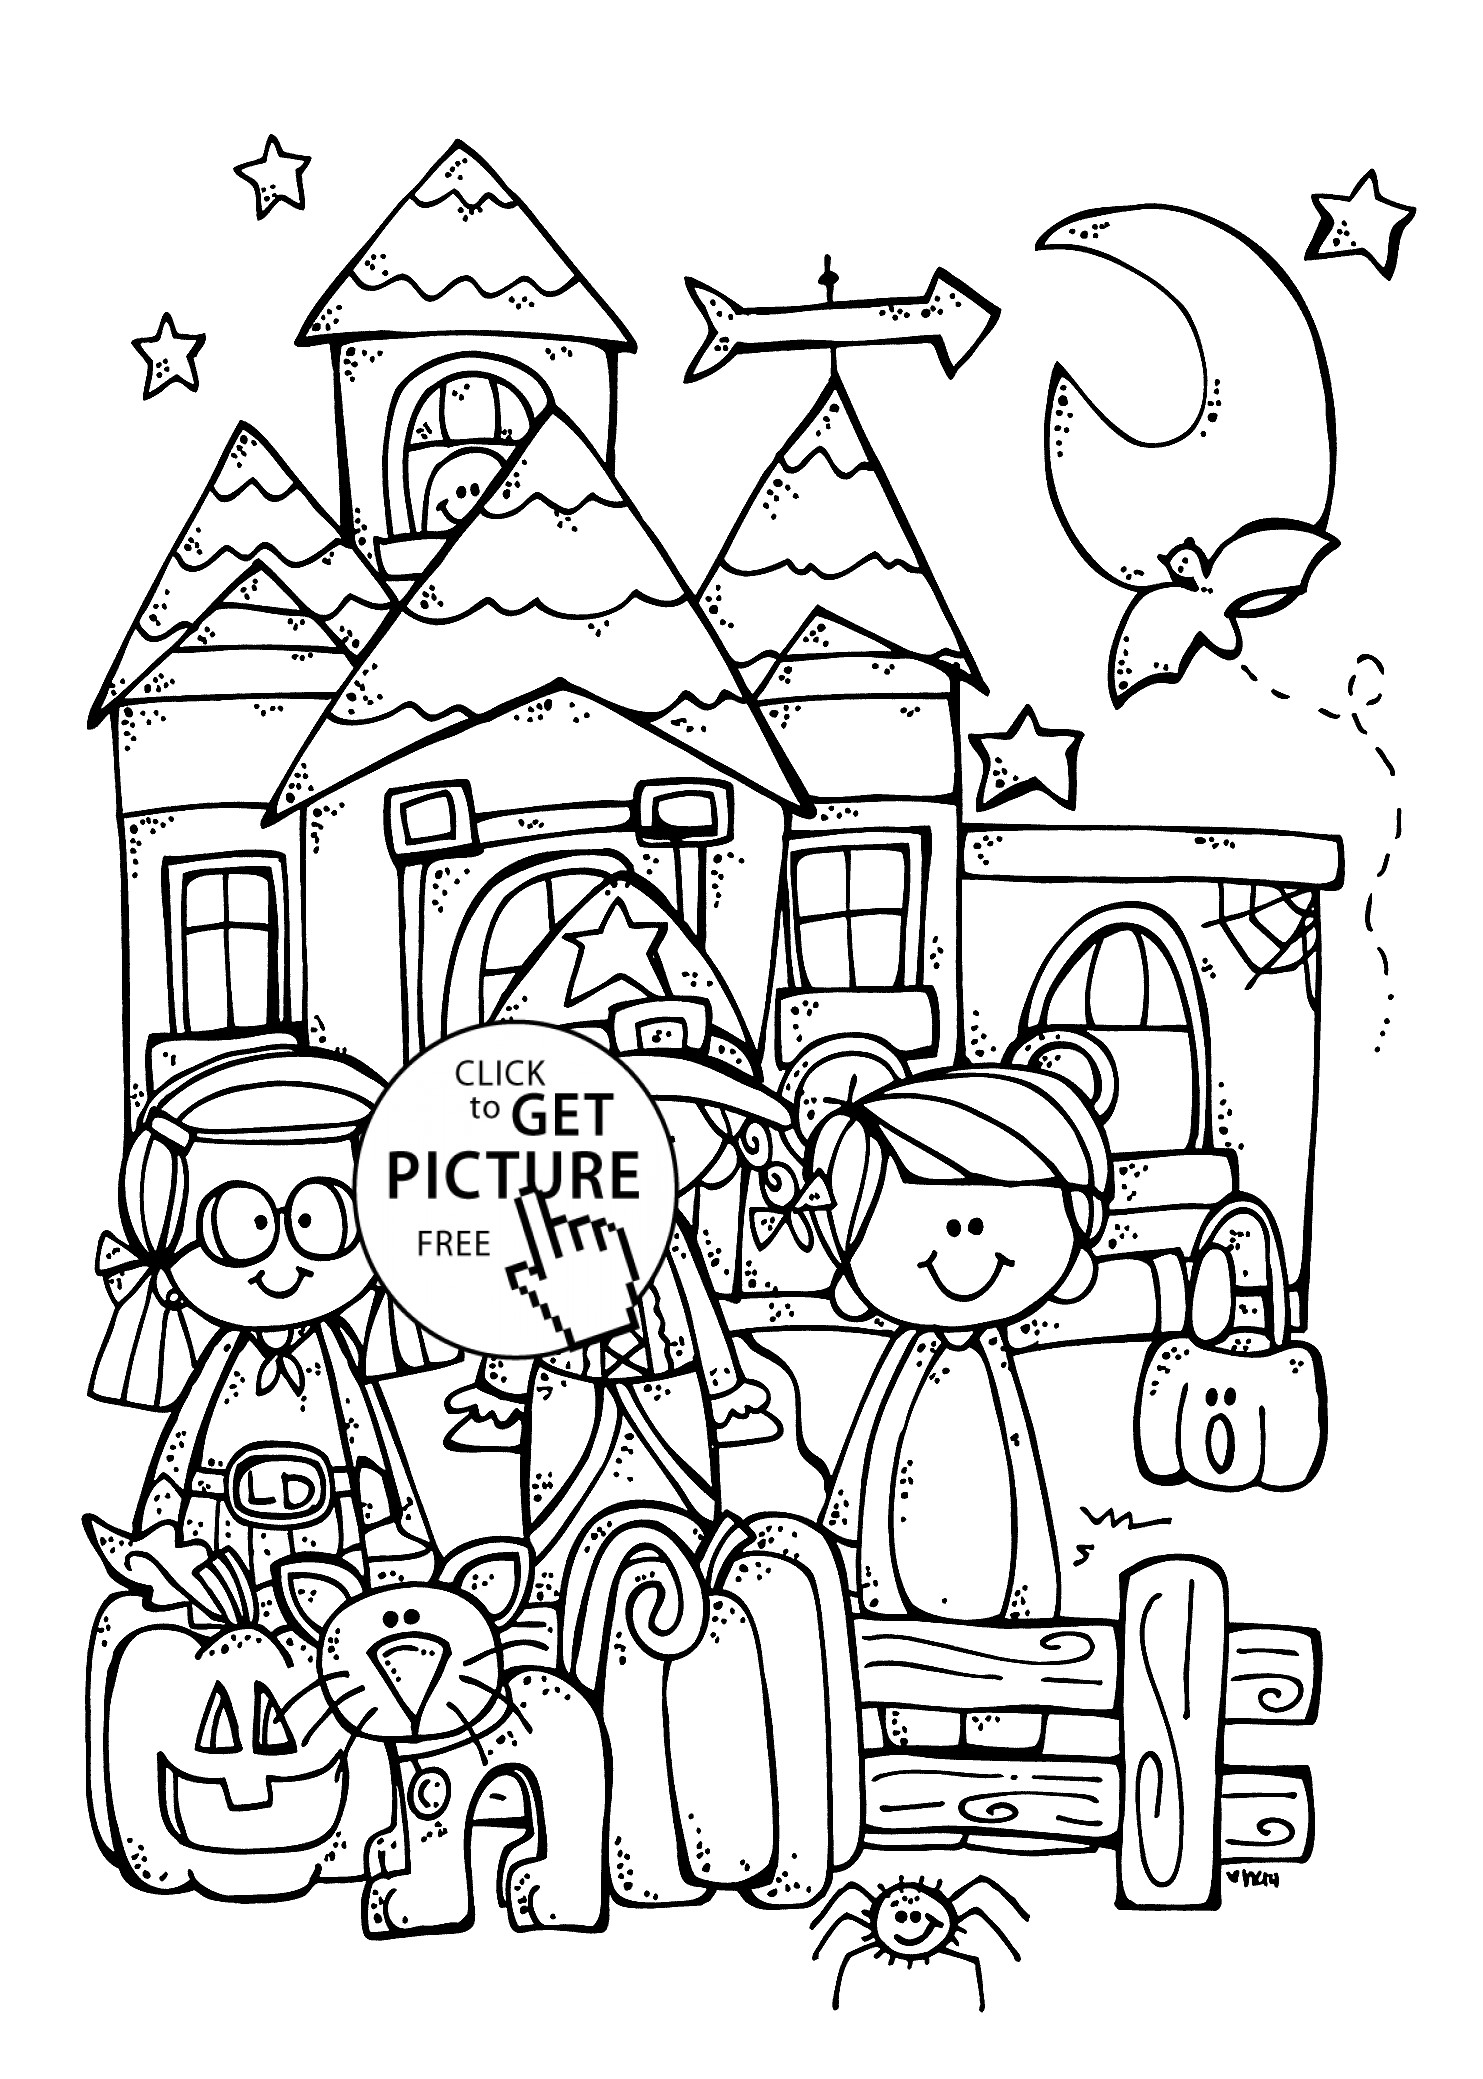 Free Halloween Coloring Pages For Toddlers
 Funny kids and Halloween coloring page for kids printable